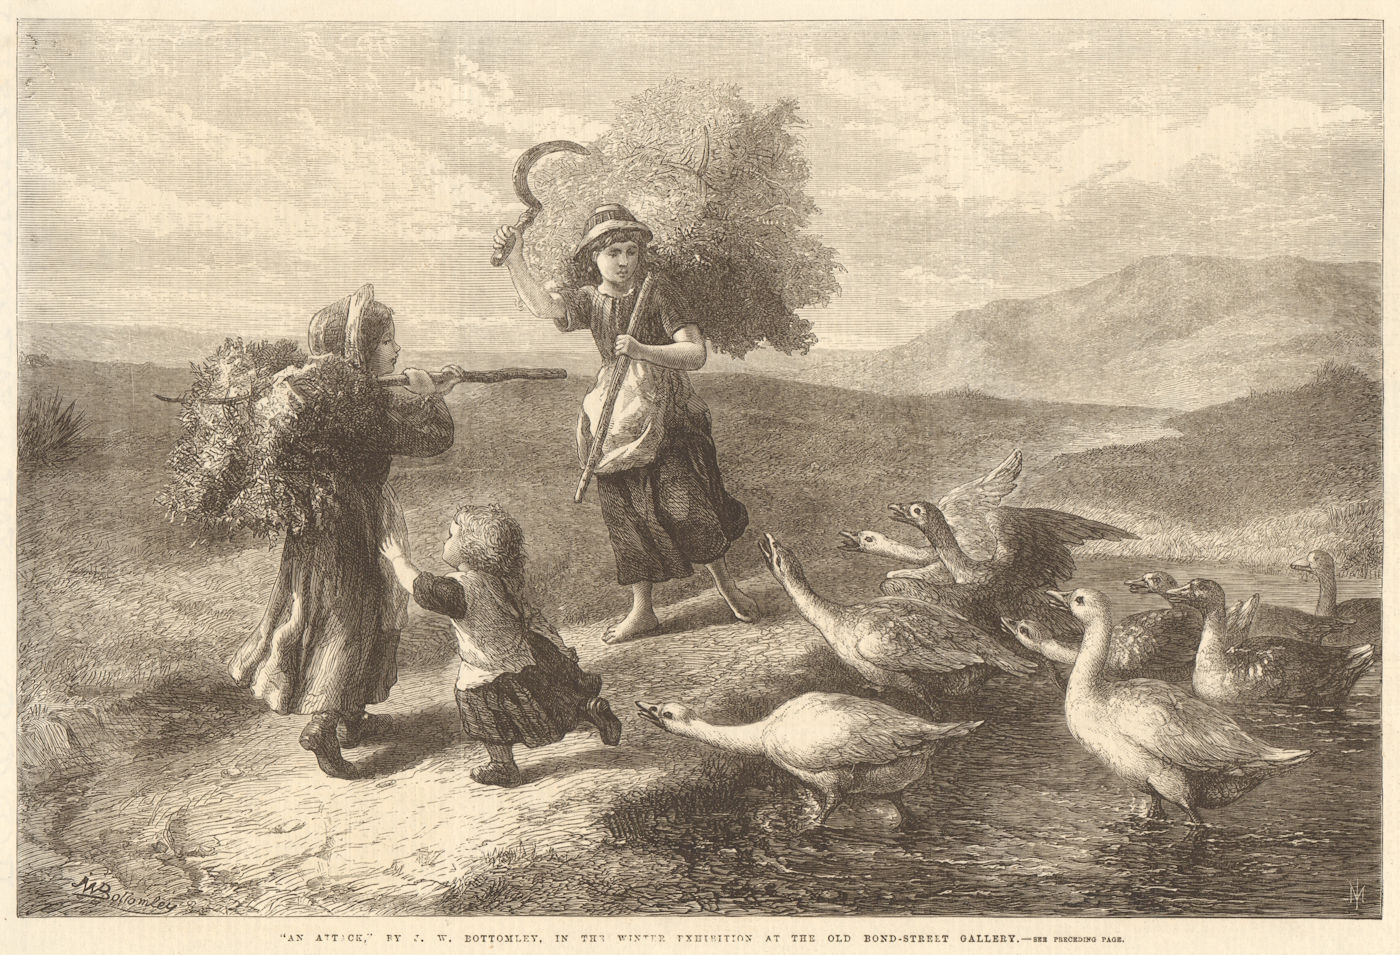 Associate Product "An attack", by J. W. Bottomley. Children. Farming Geese 1869 old print